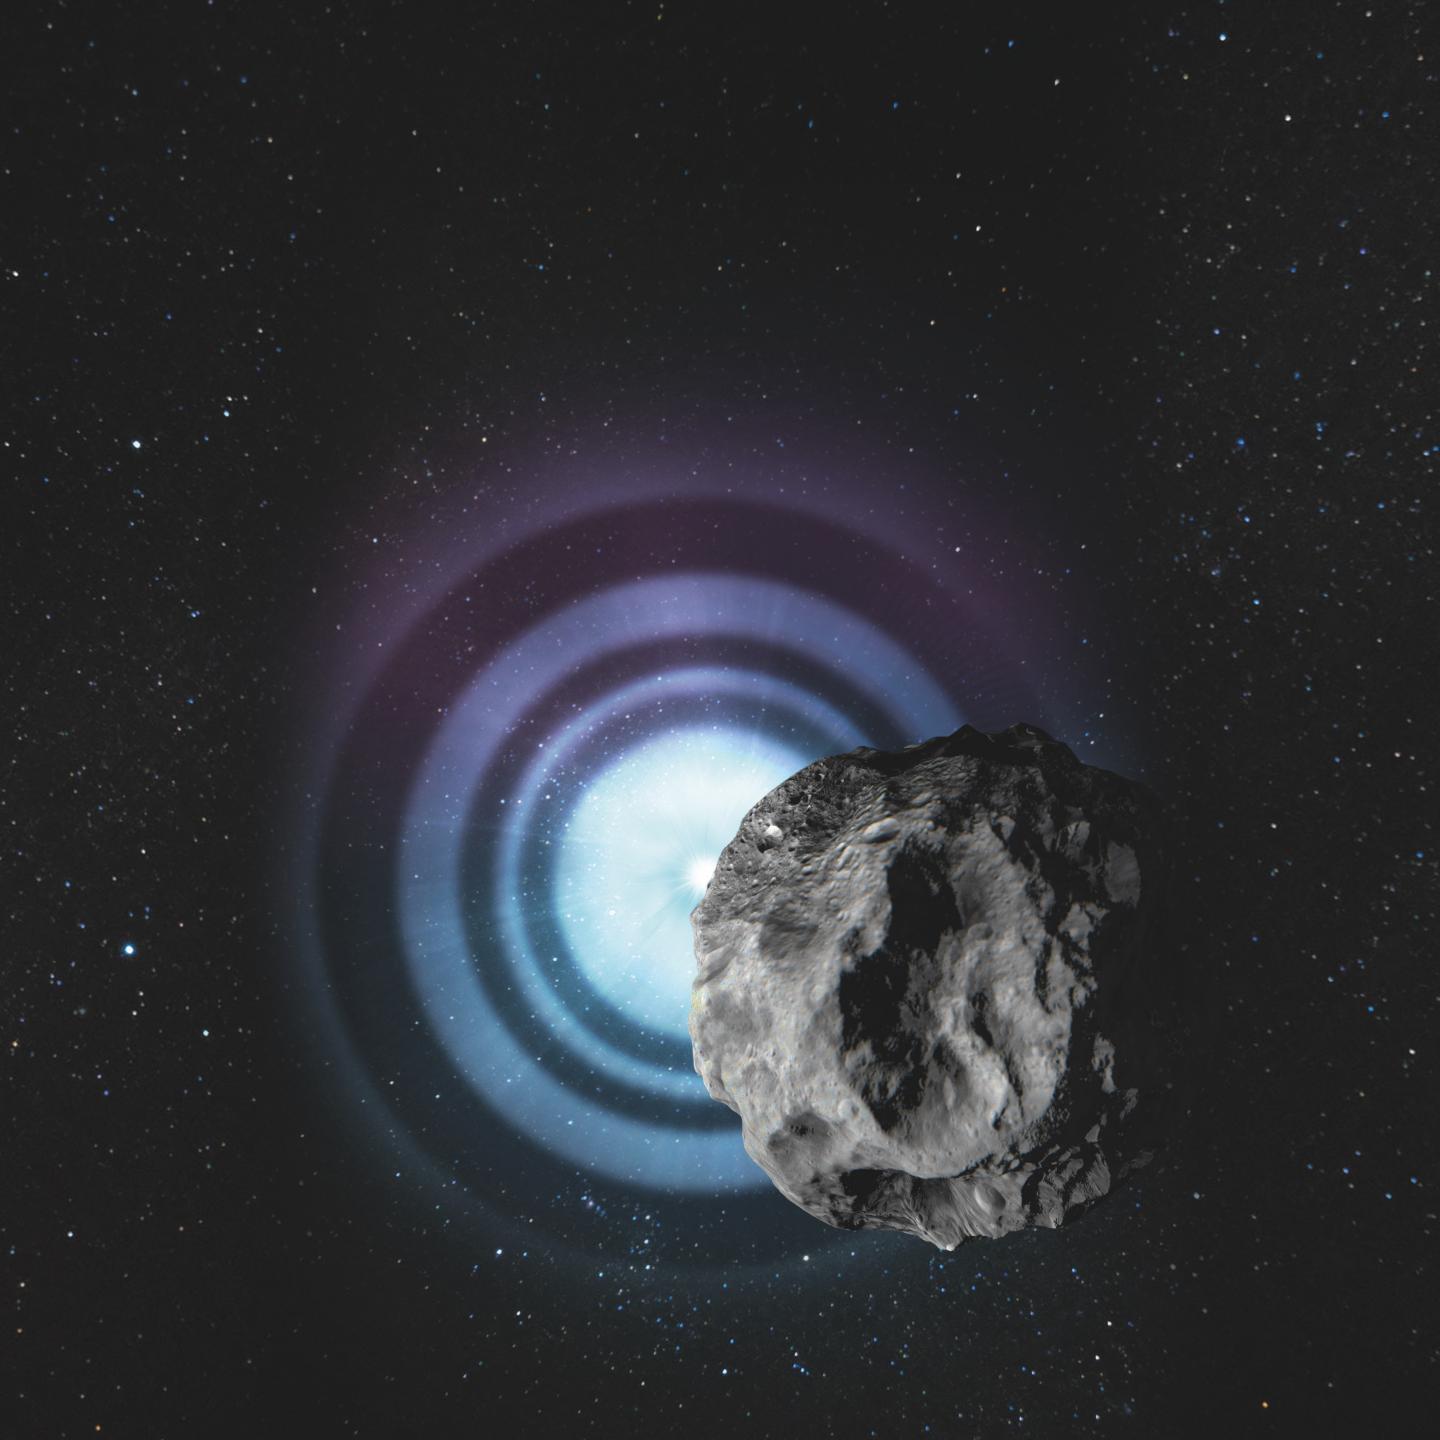 Asteroids Help Scientists To Measure The Diameters Of Far Away Stars